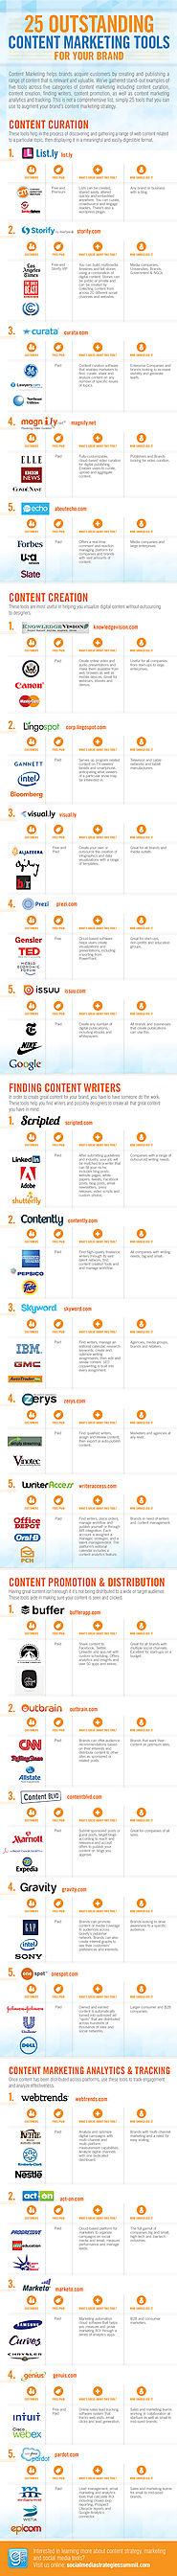 25 Content Marketing Tools for Curation, Creation, Promotion & Distribution [Infographic]